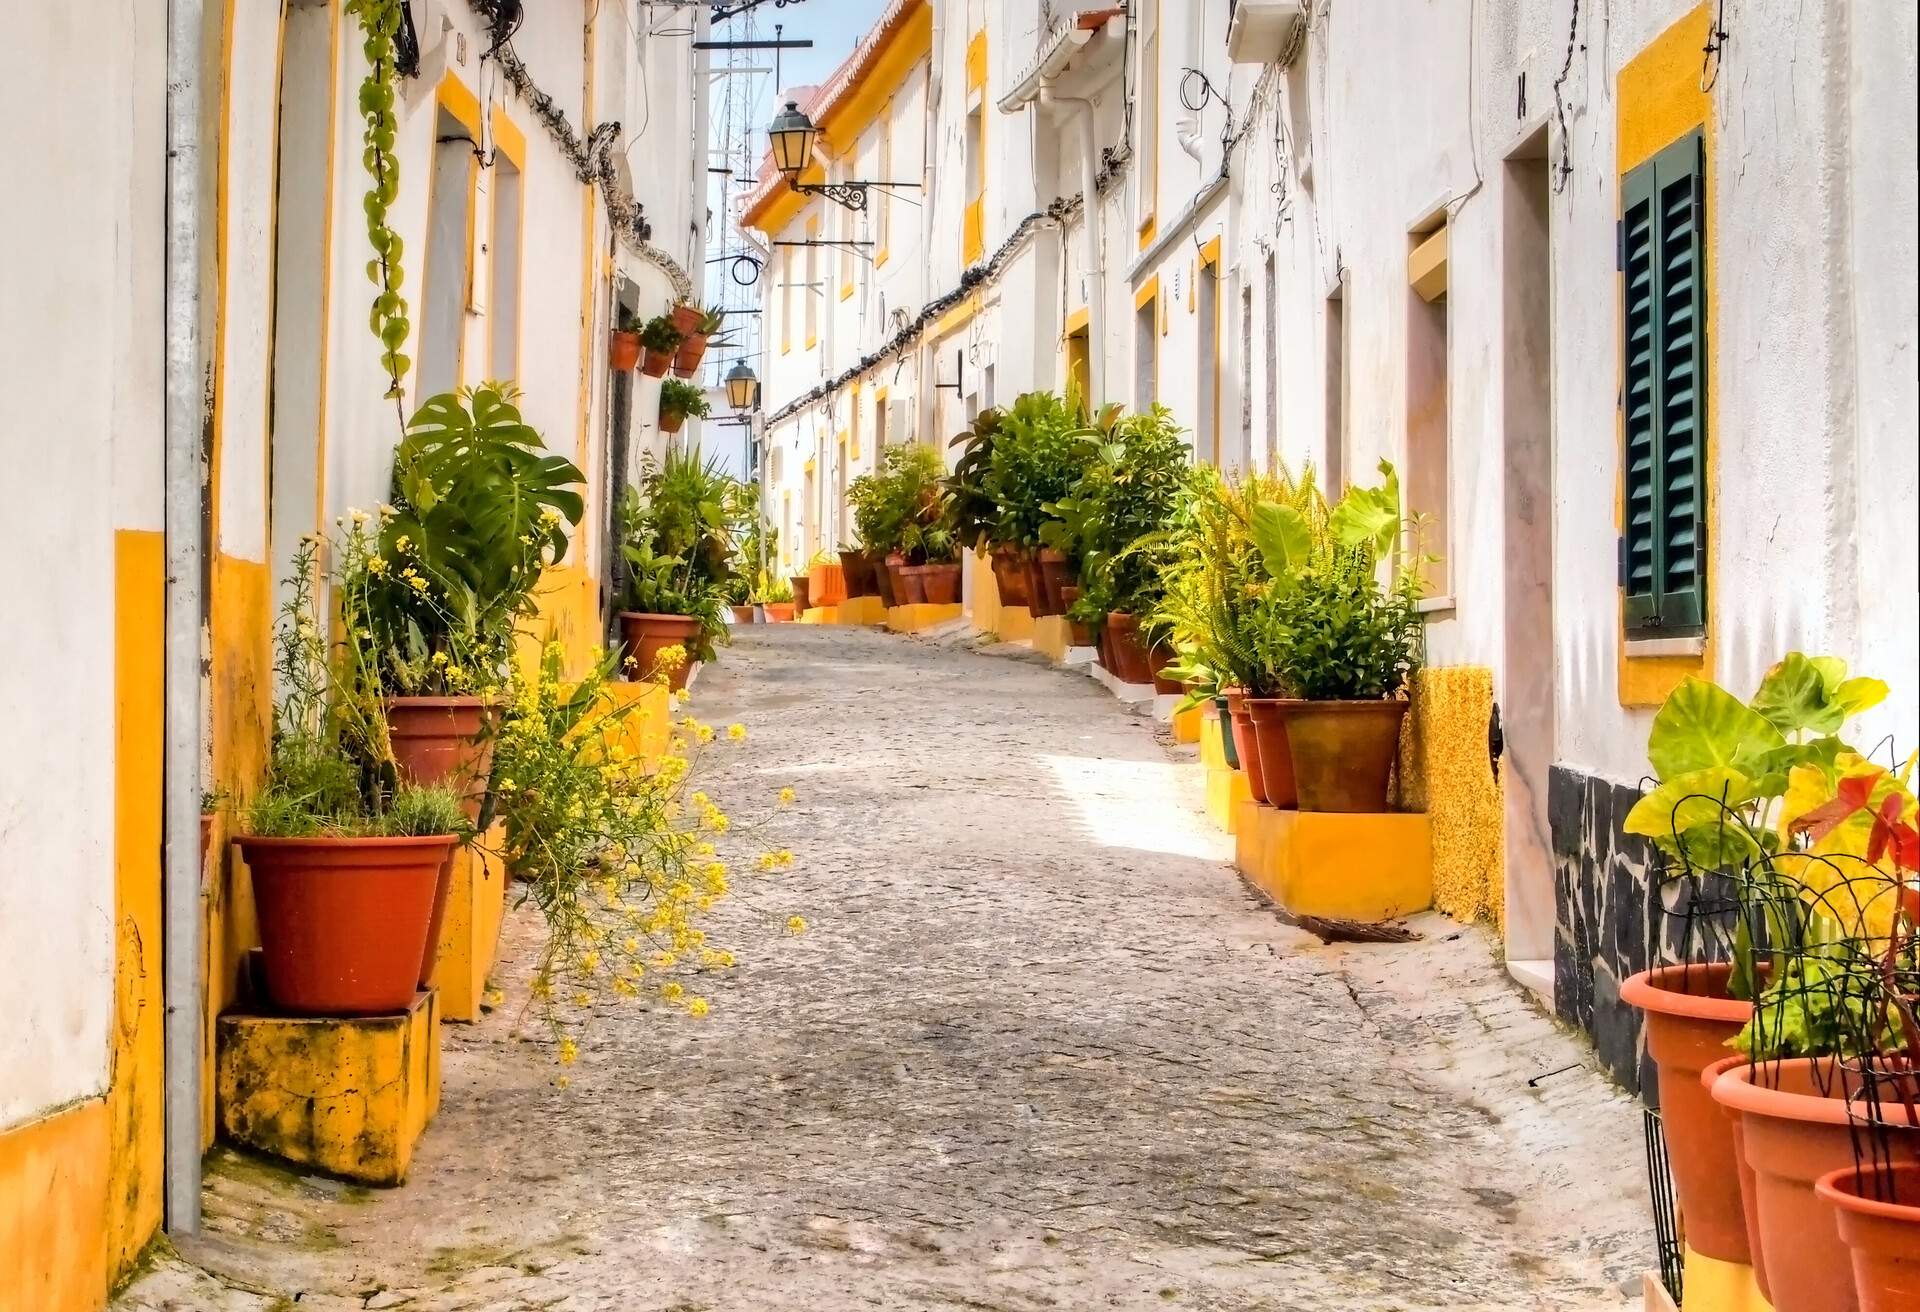 A typical street in Alentejo's villages. Elvas, Portugal.; Shutterstock ID 1077929714; purchase_order: ; job: ; client: ; other: